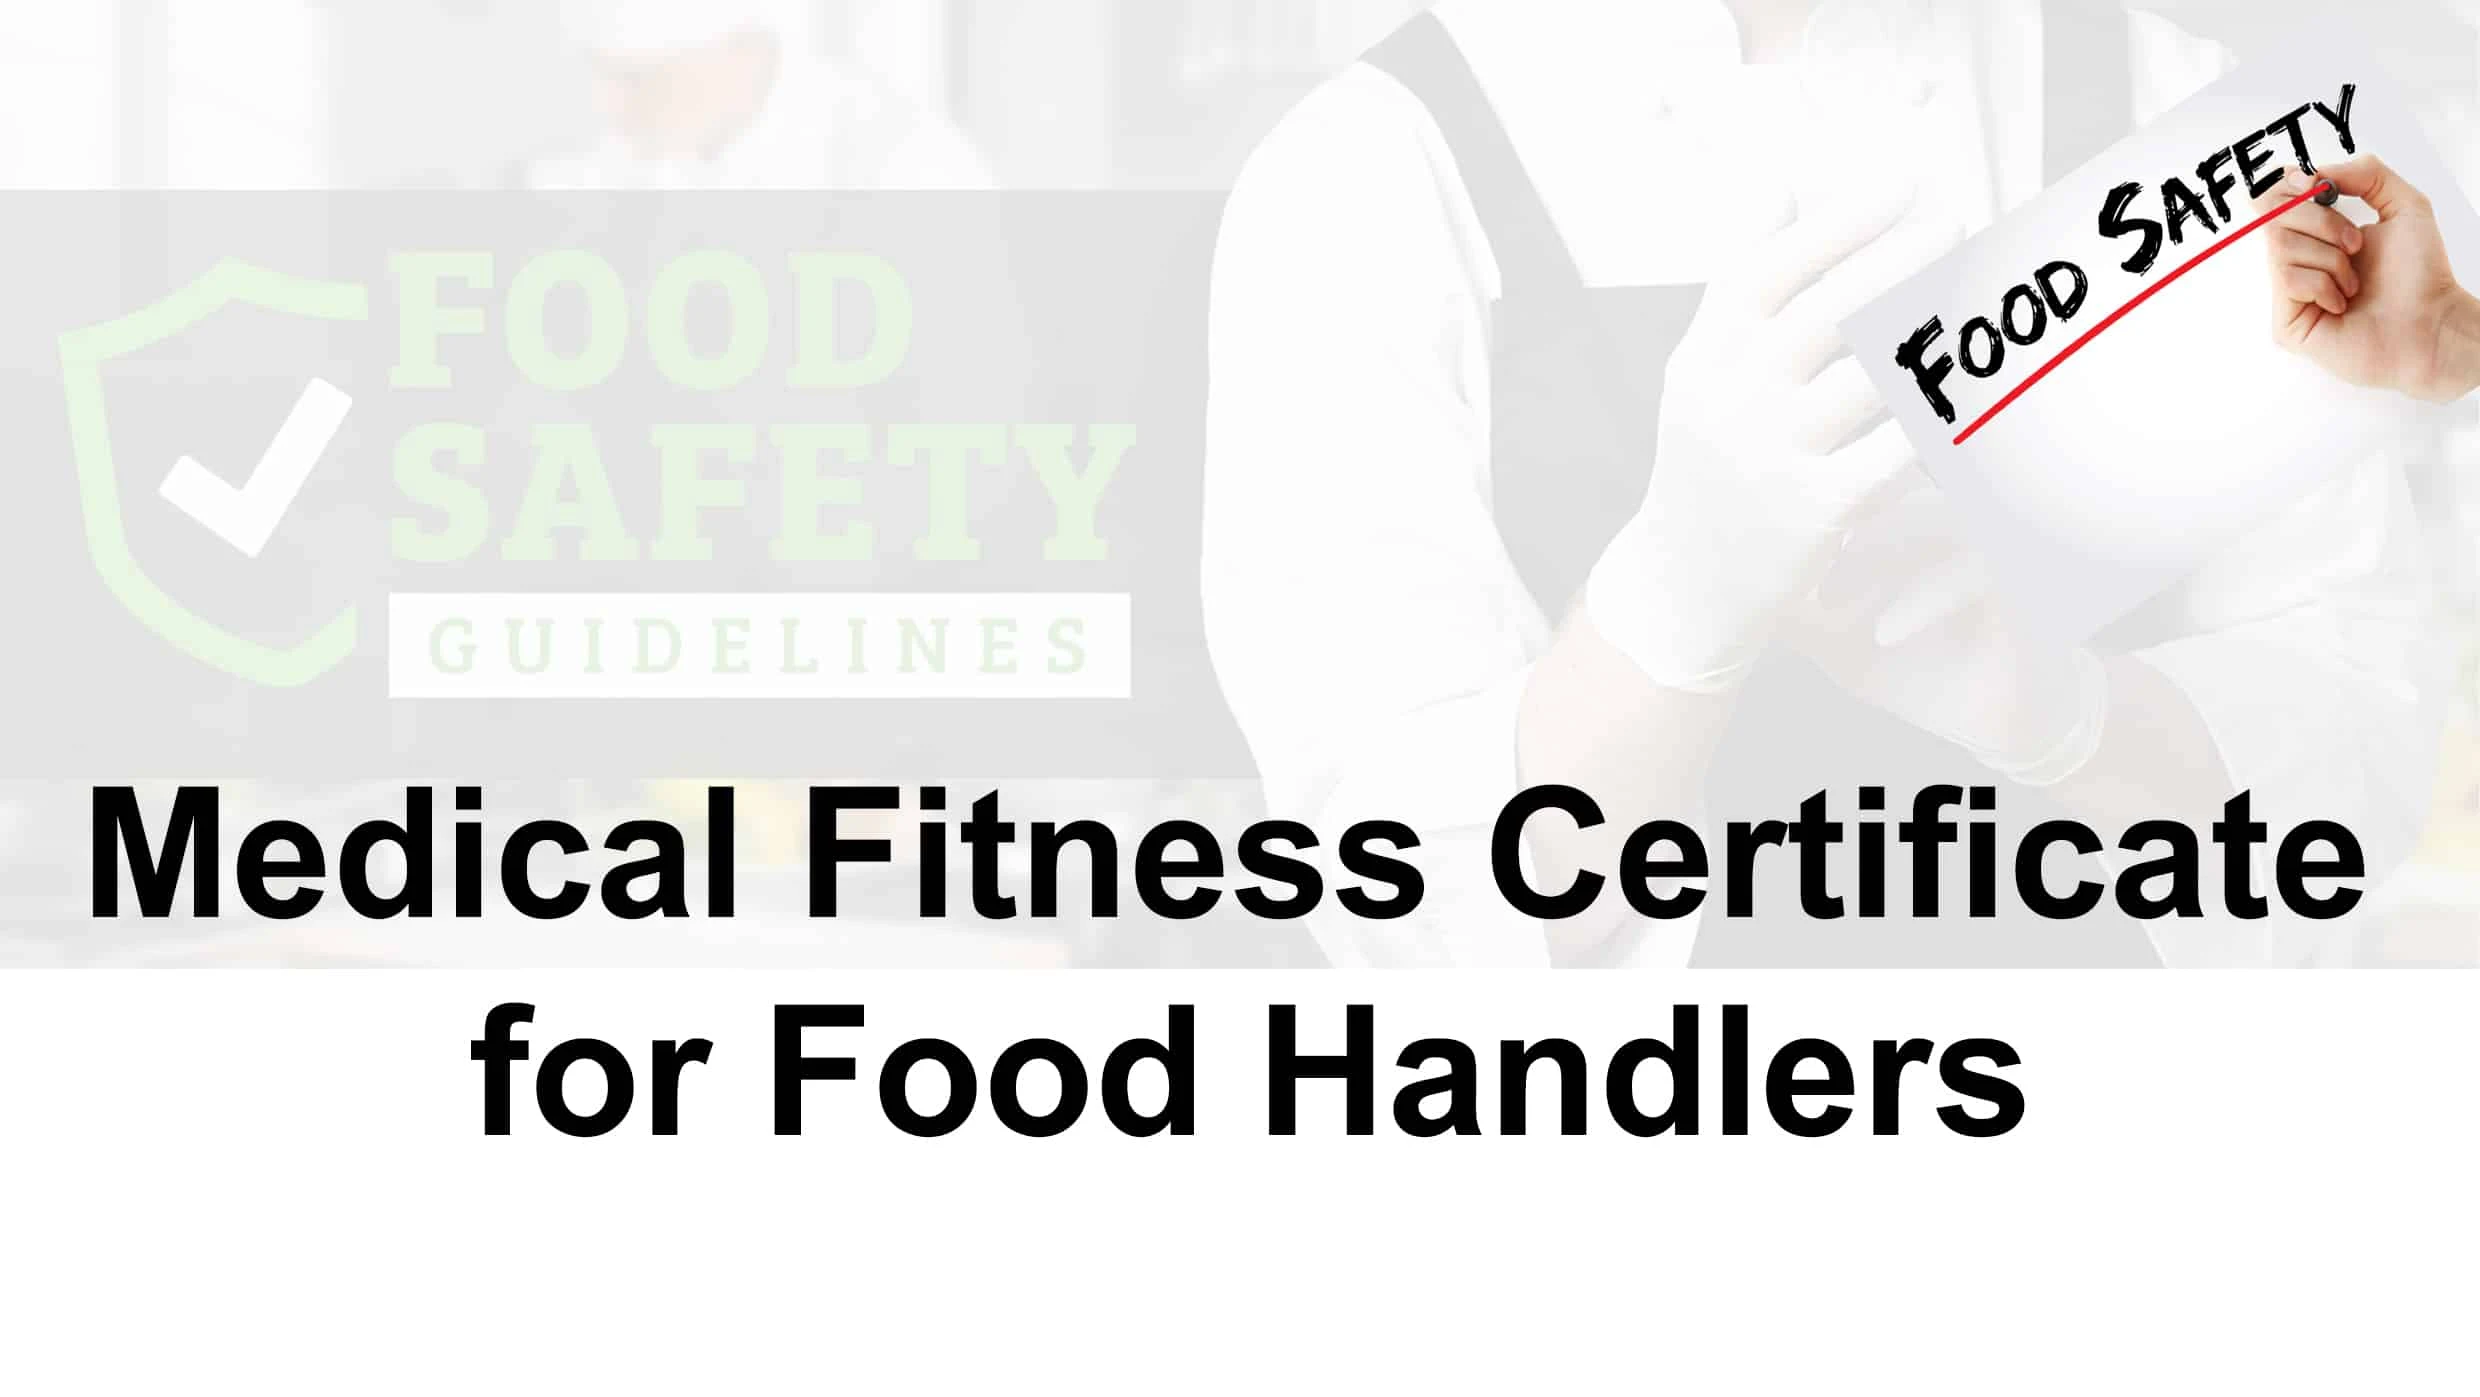 Medical Fitness Certificate for Food Handlers